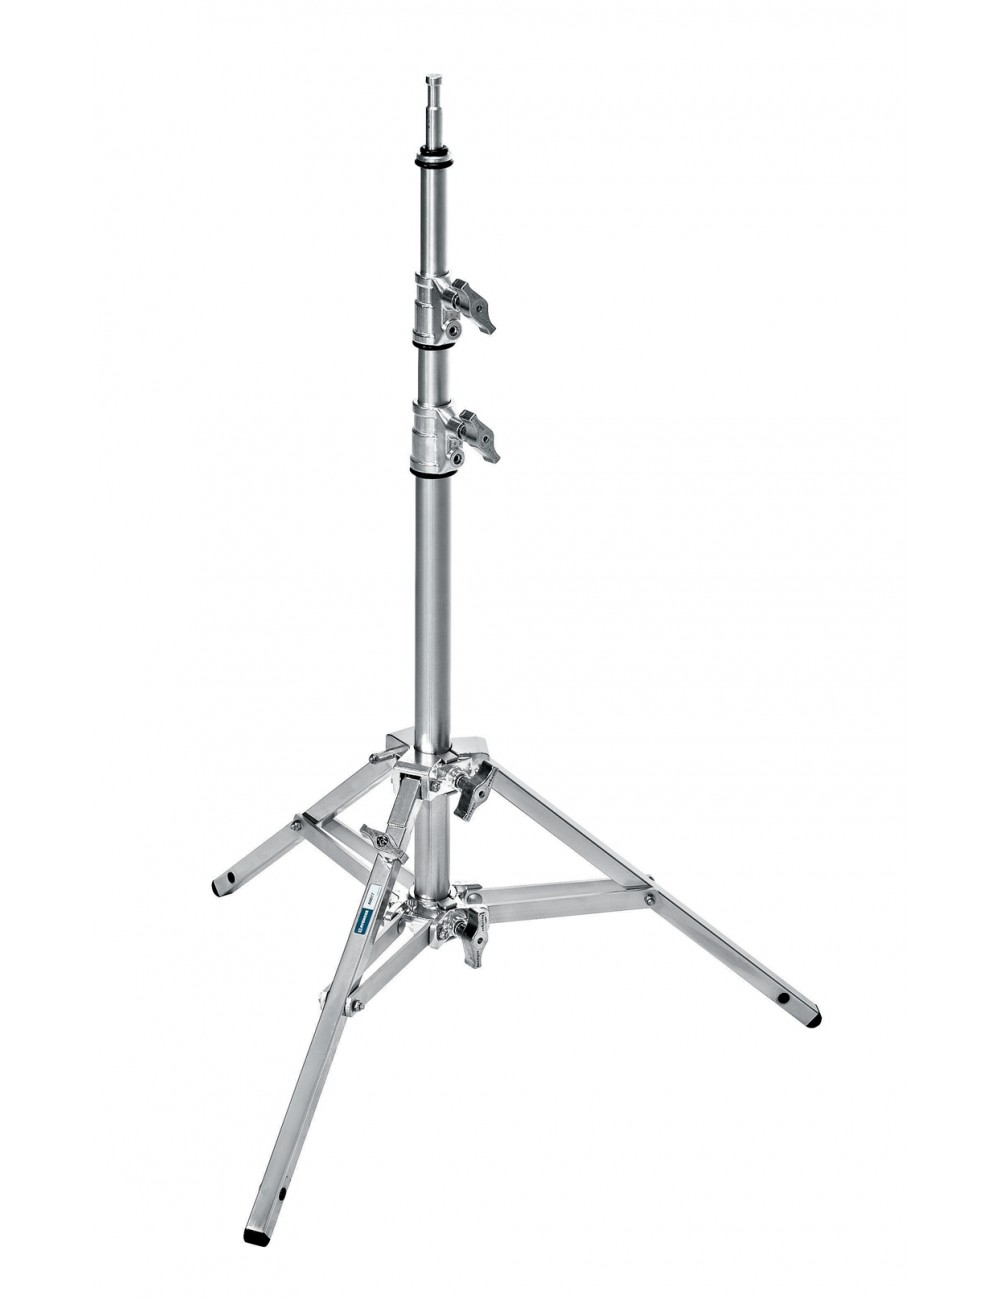 Baby Stand 17 Steel Base Alu Risers Sil 170 cm/35 in Avenger - 
Load capacity: 4 kg/8.8 lbs., Max Height: 175 cm/68.9''
Chrome S